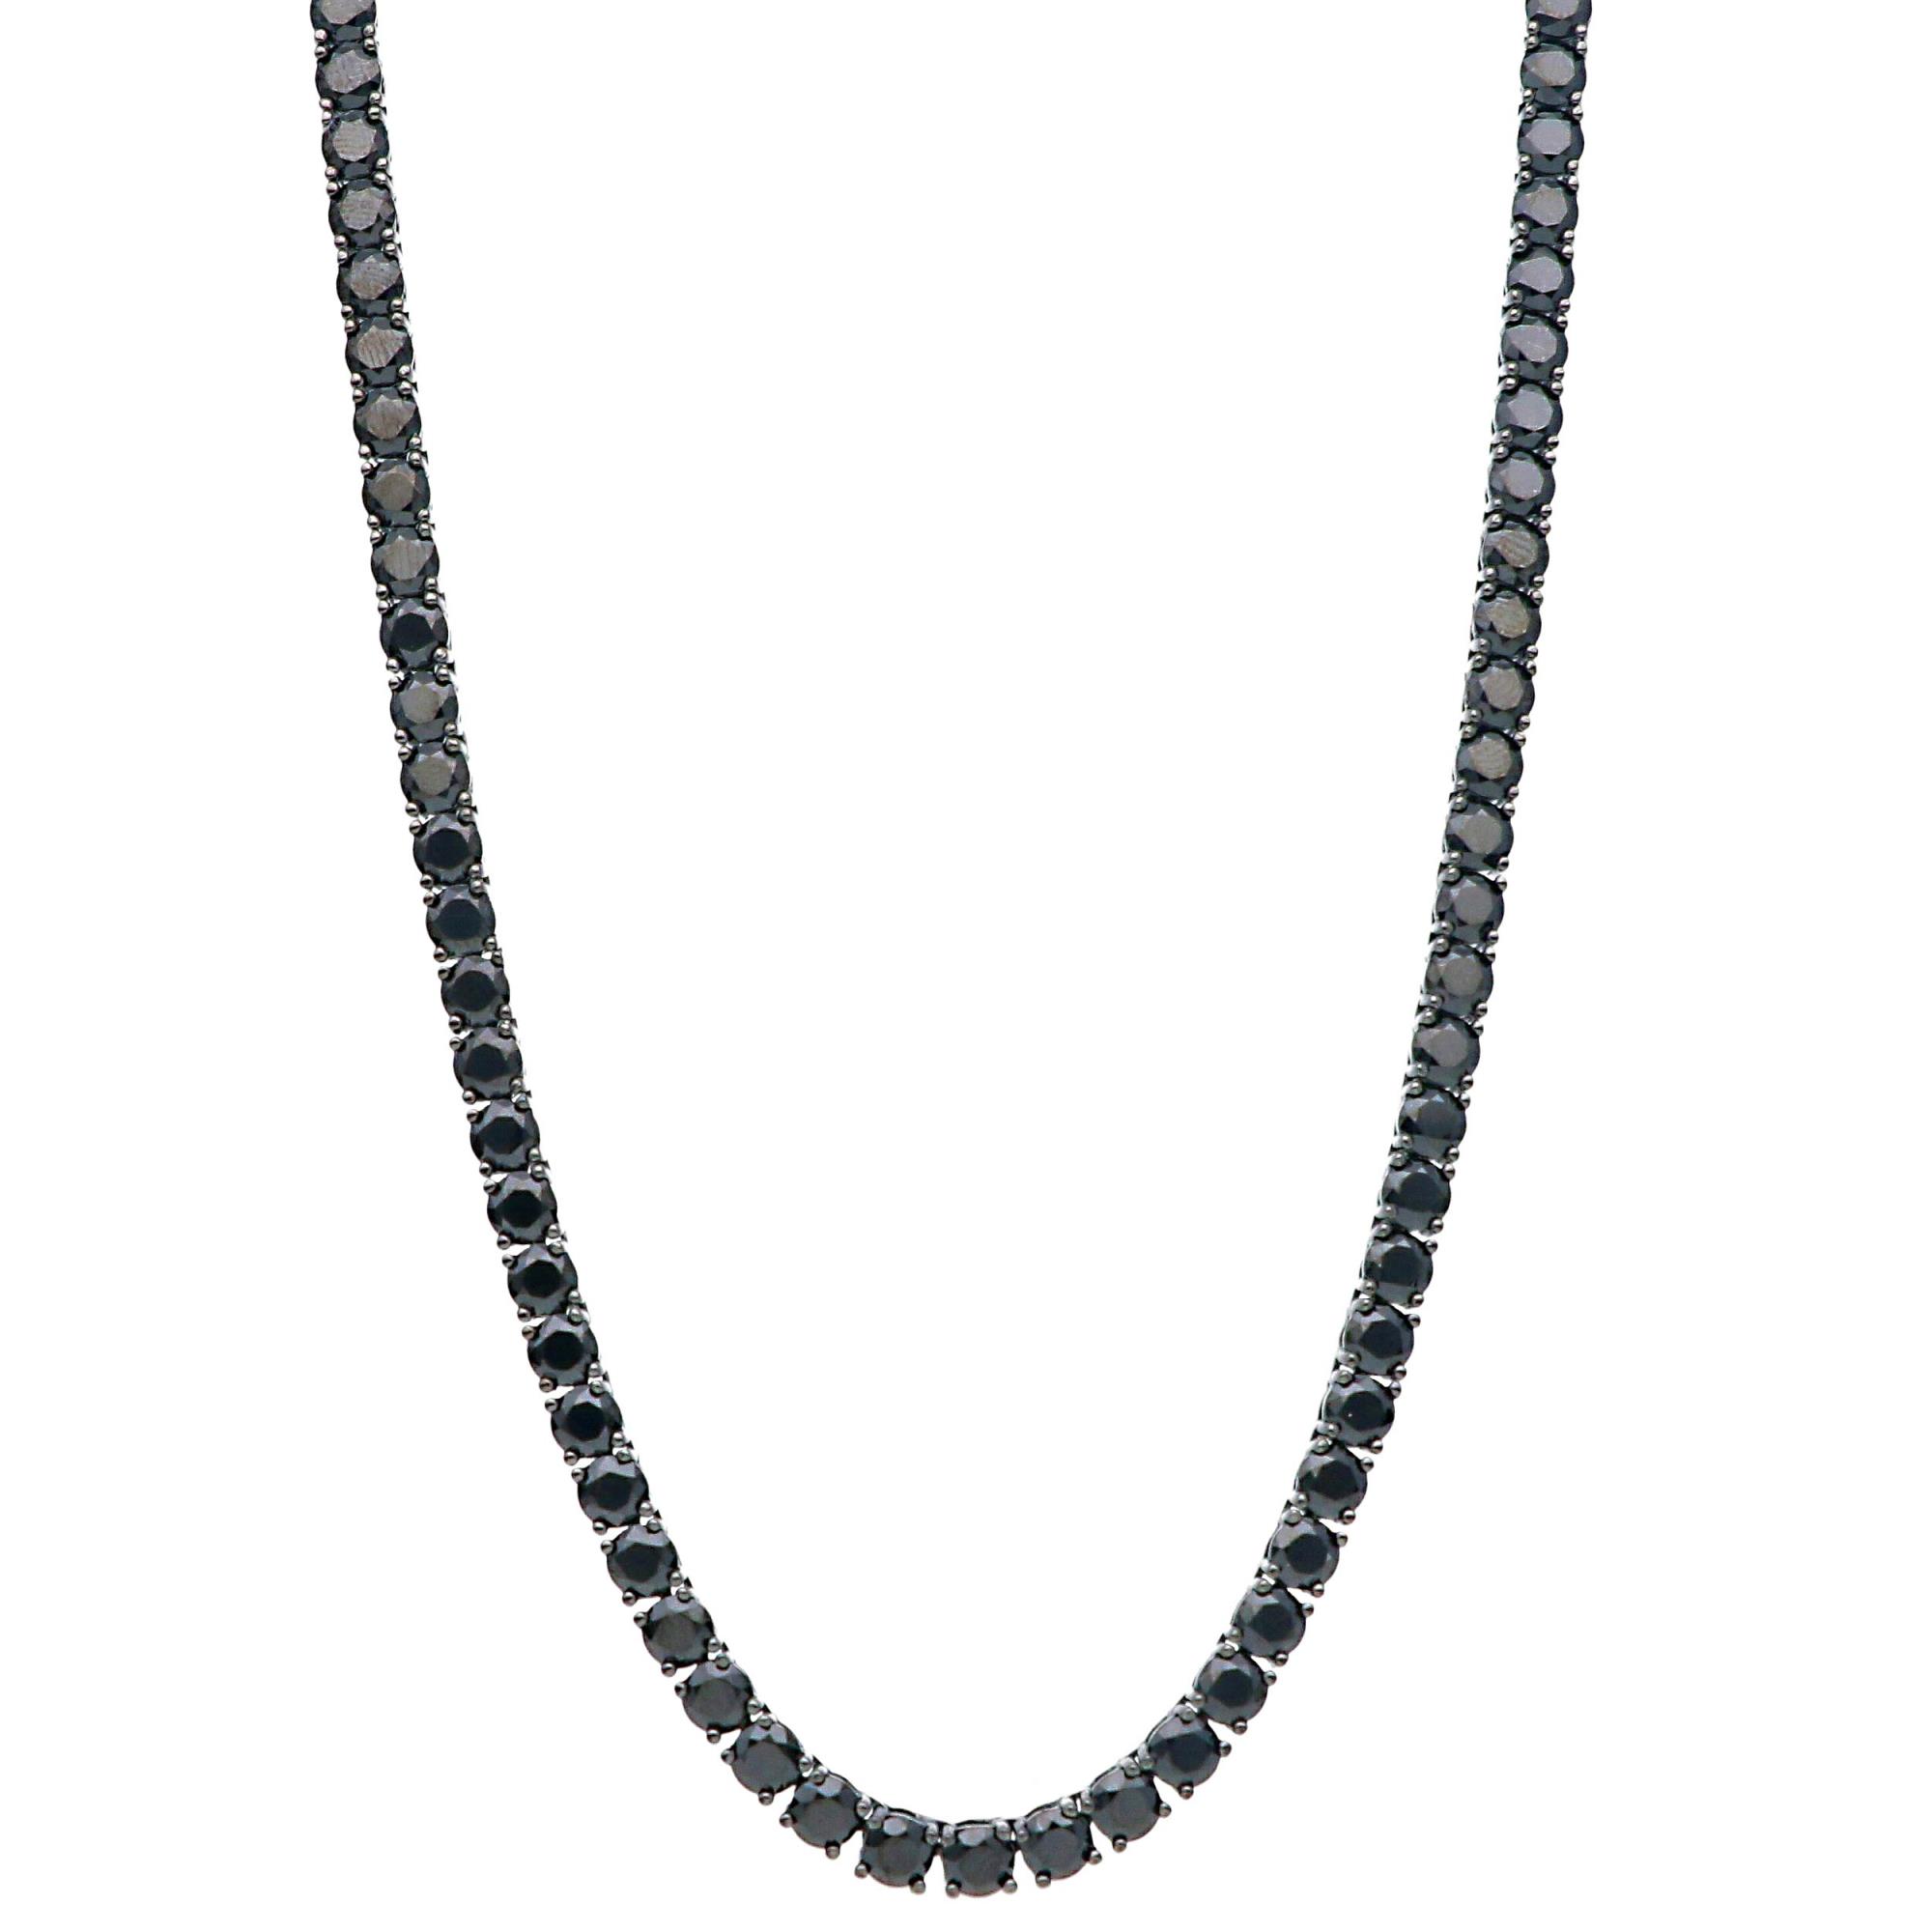 Silver tennis necklace with black zircons - ORO&CO 925